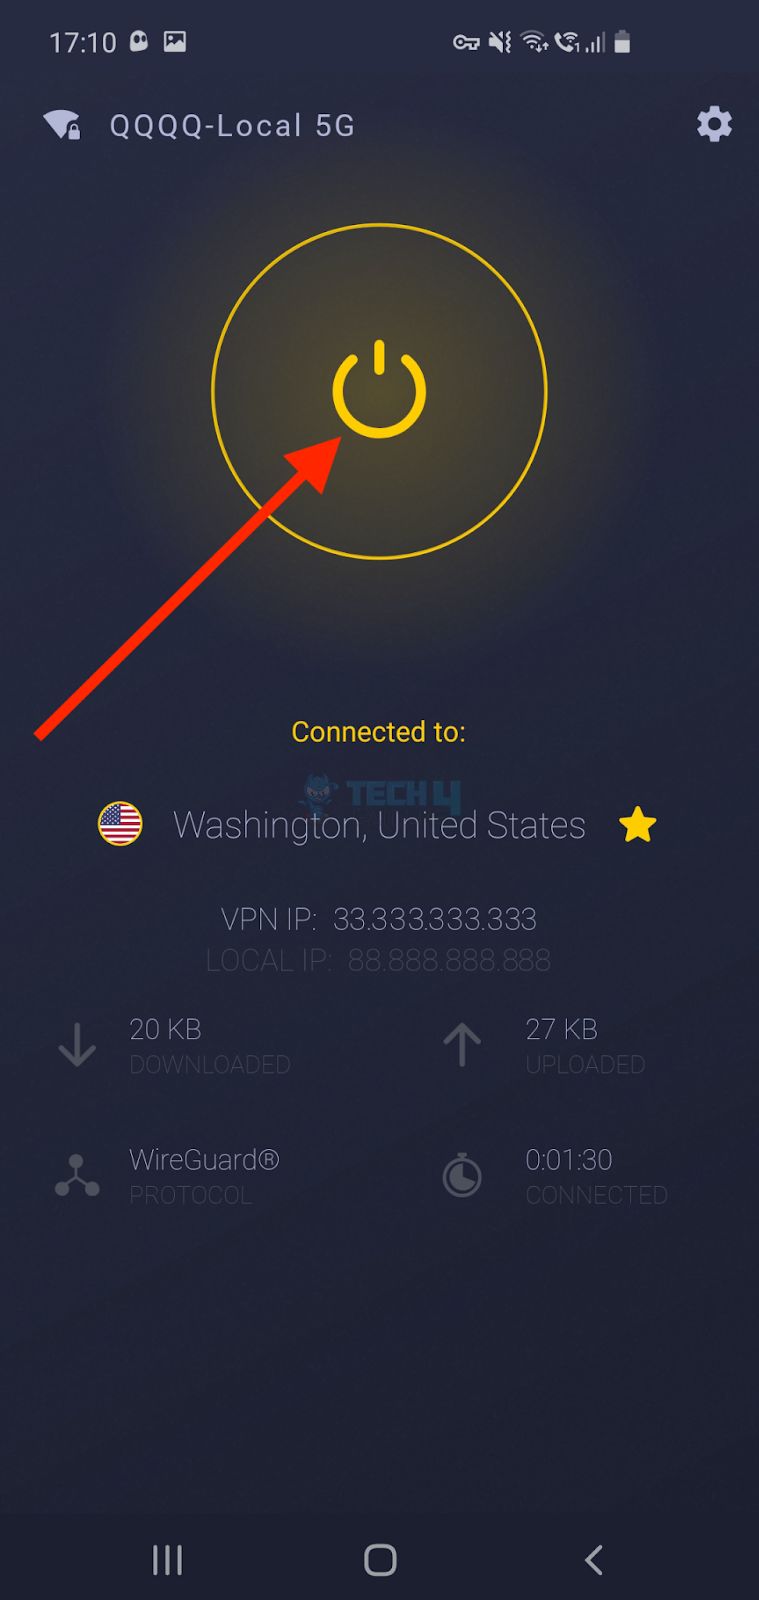 Toggle Button to Disconnect the VPN